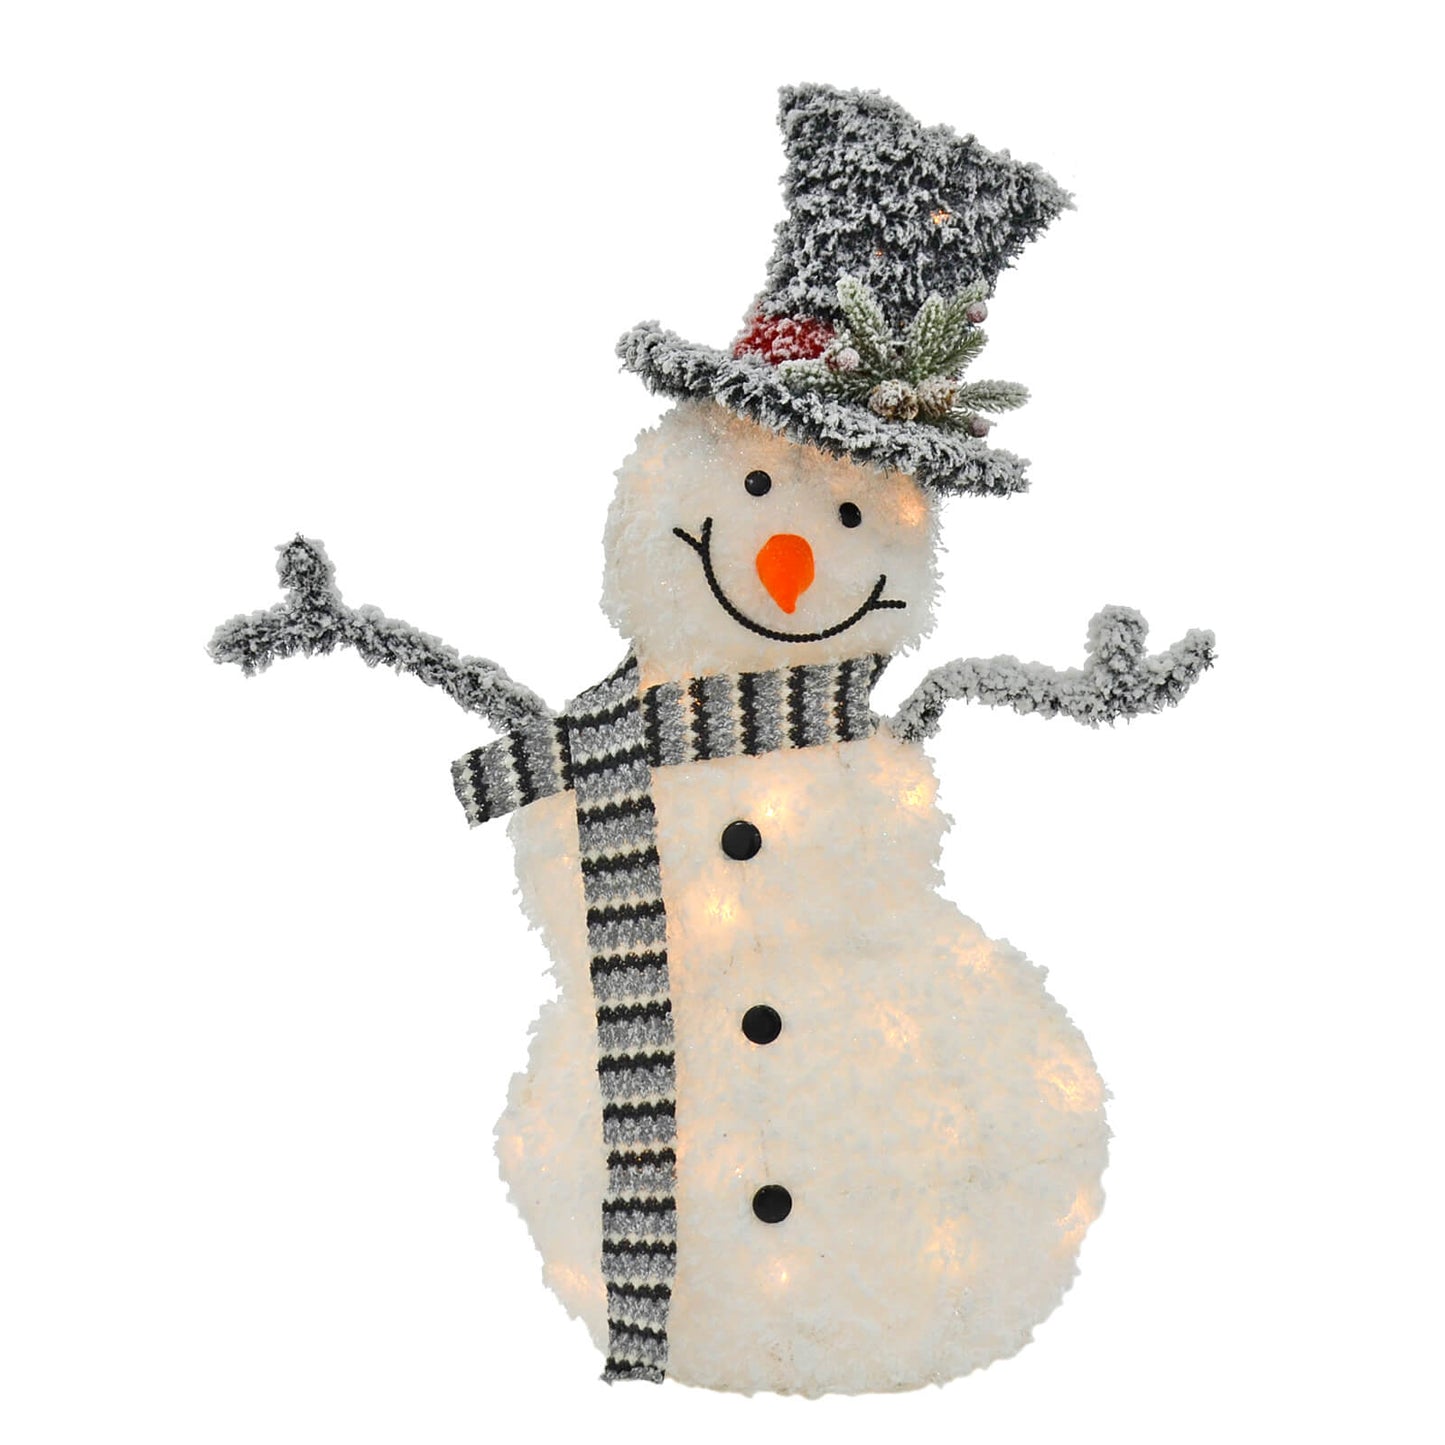 Happy dancing nsowman light up Christmas decoration with top hat, black and grey knitted scarf, pine cones, foliage, orange felt carrot nose and lit by warm white LED lights